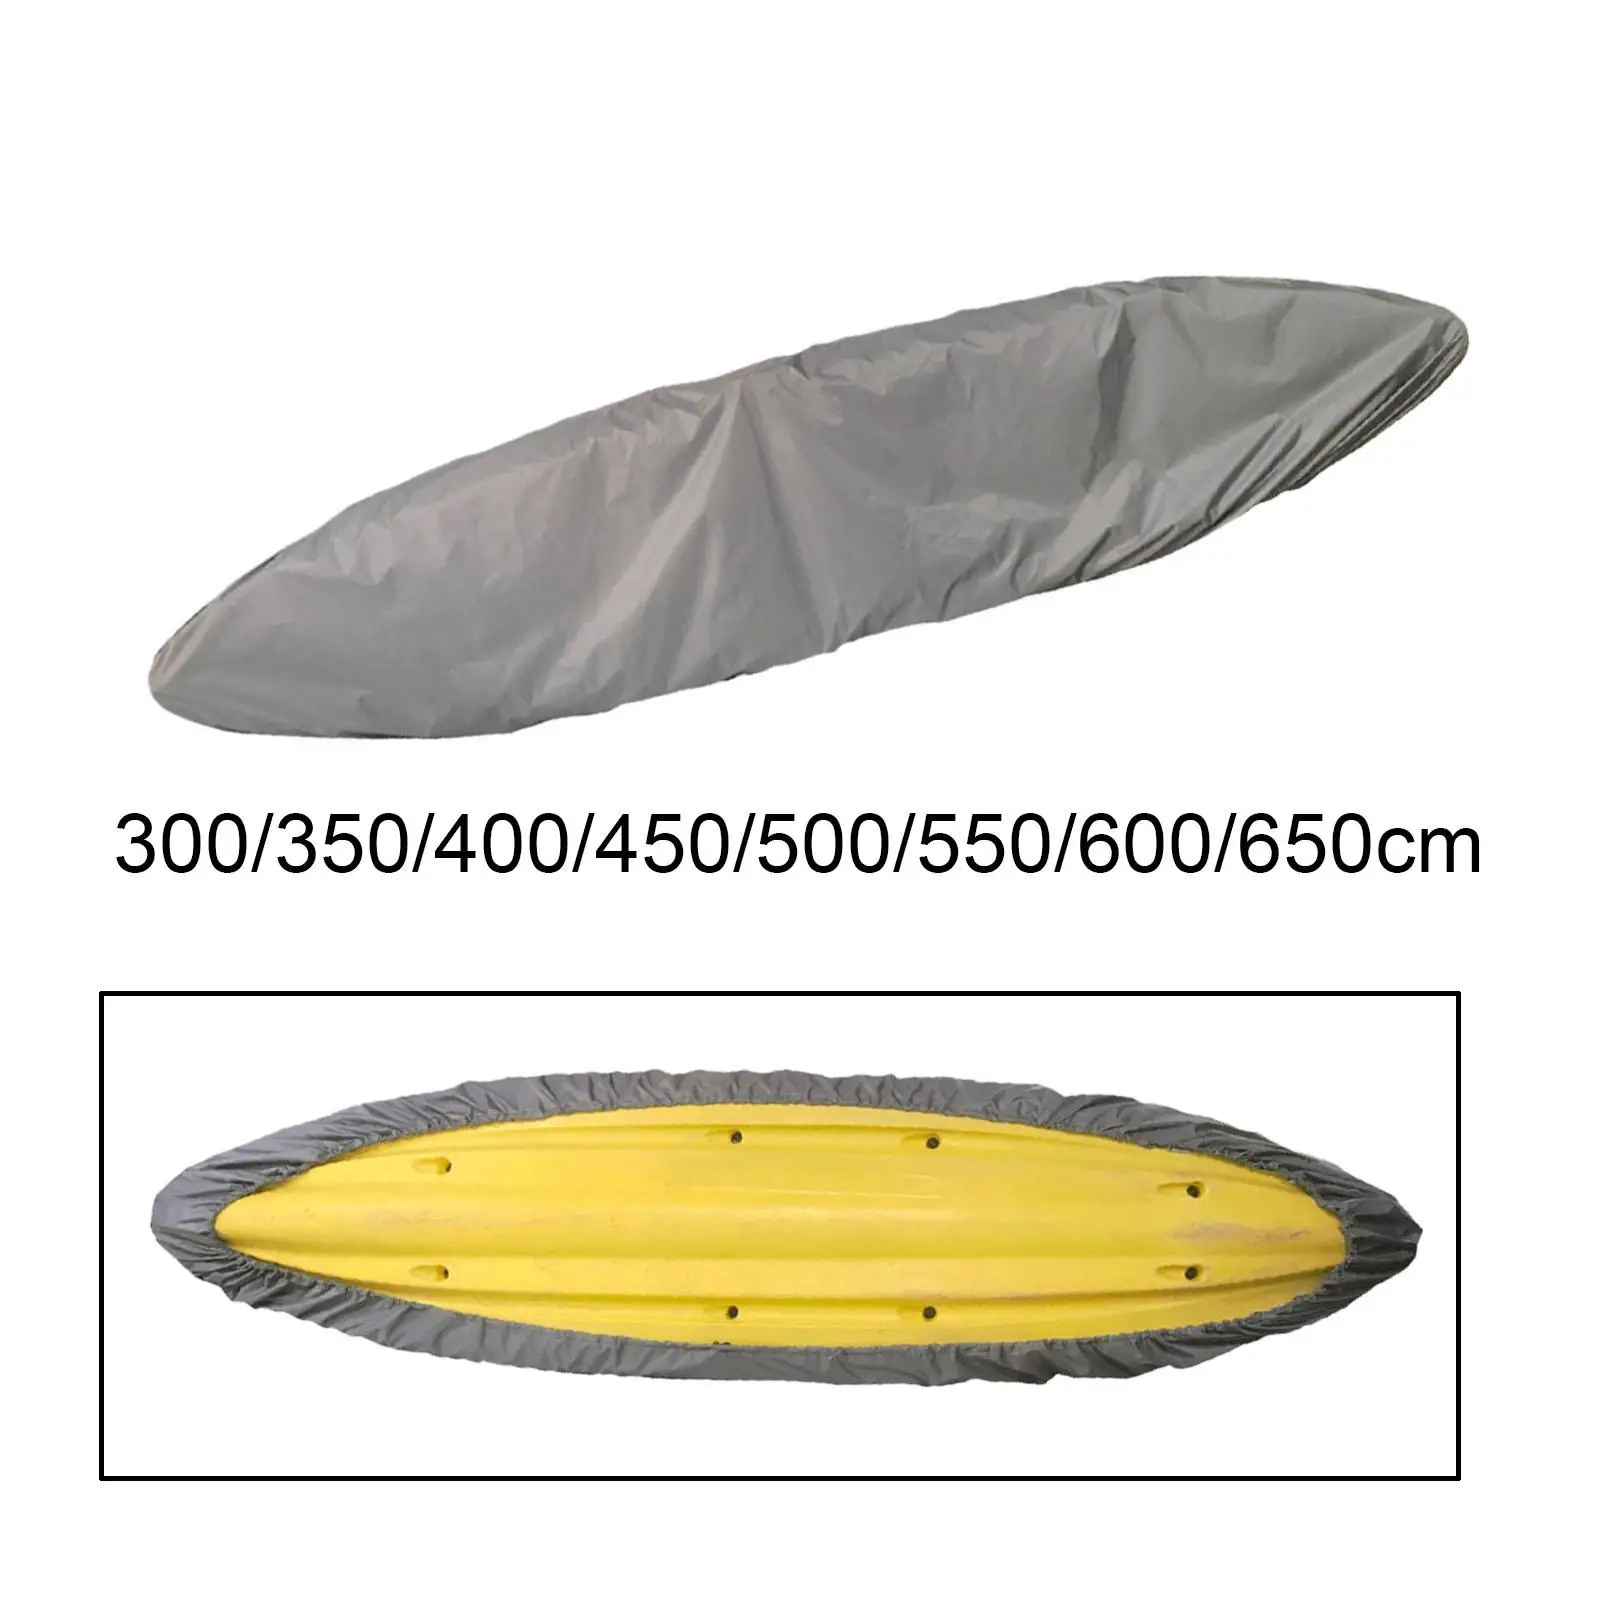 Canoe Cover Kayak Canoe Cover Oxford Cloth Sunblock Shield Waterproof Kayak Cover Boat Dust Cover for Canoeing Kayaking Surfing